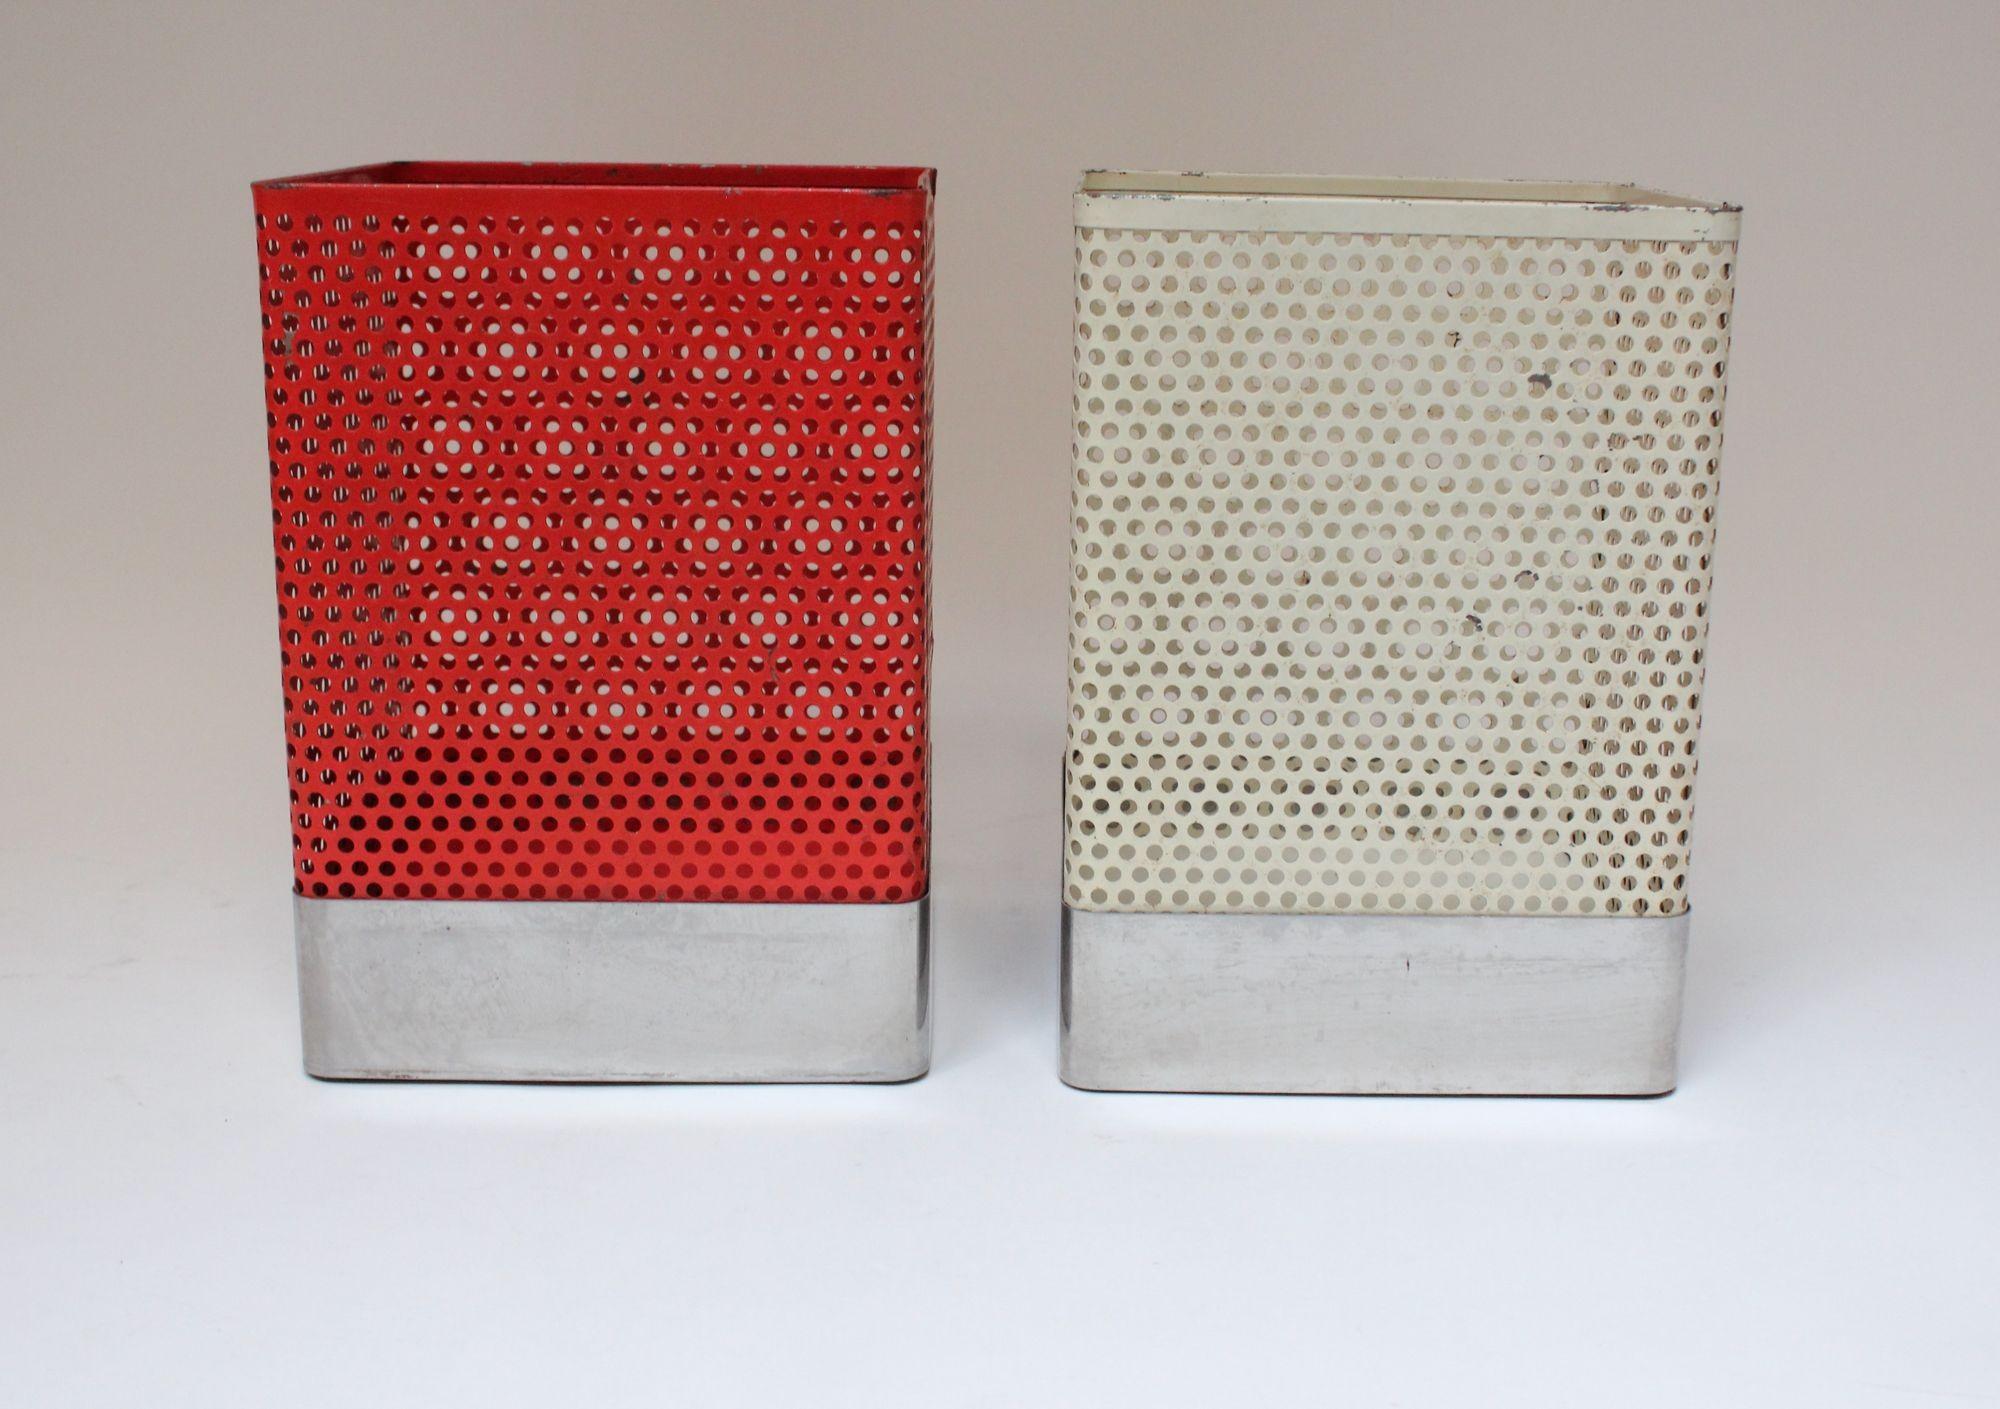 Mathieu Matégot-Style wastebaskets/trashcans composed of perforated metal vessels (one red, one cream) with aluminum trim (ca. 1960s, Italy).
Beautifully aged condition with paint losses and wear to the aluminum, as shown. Additionally, there is one